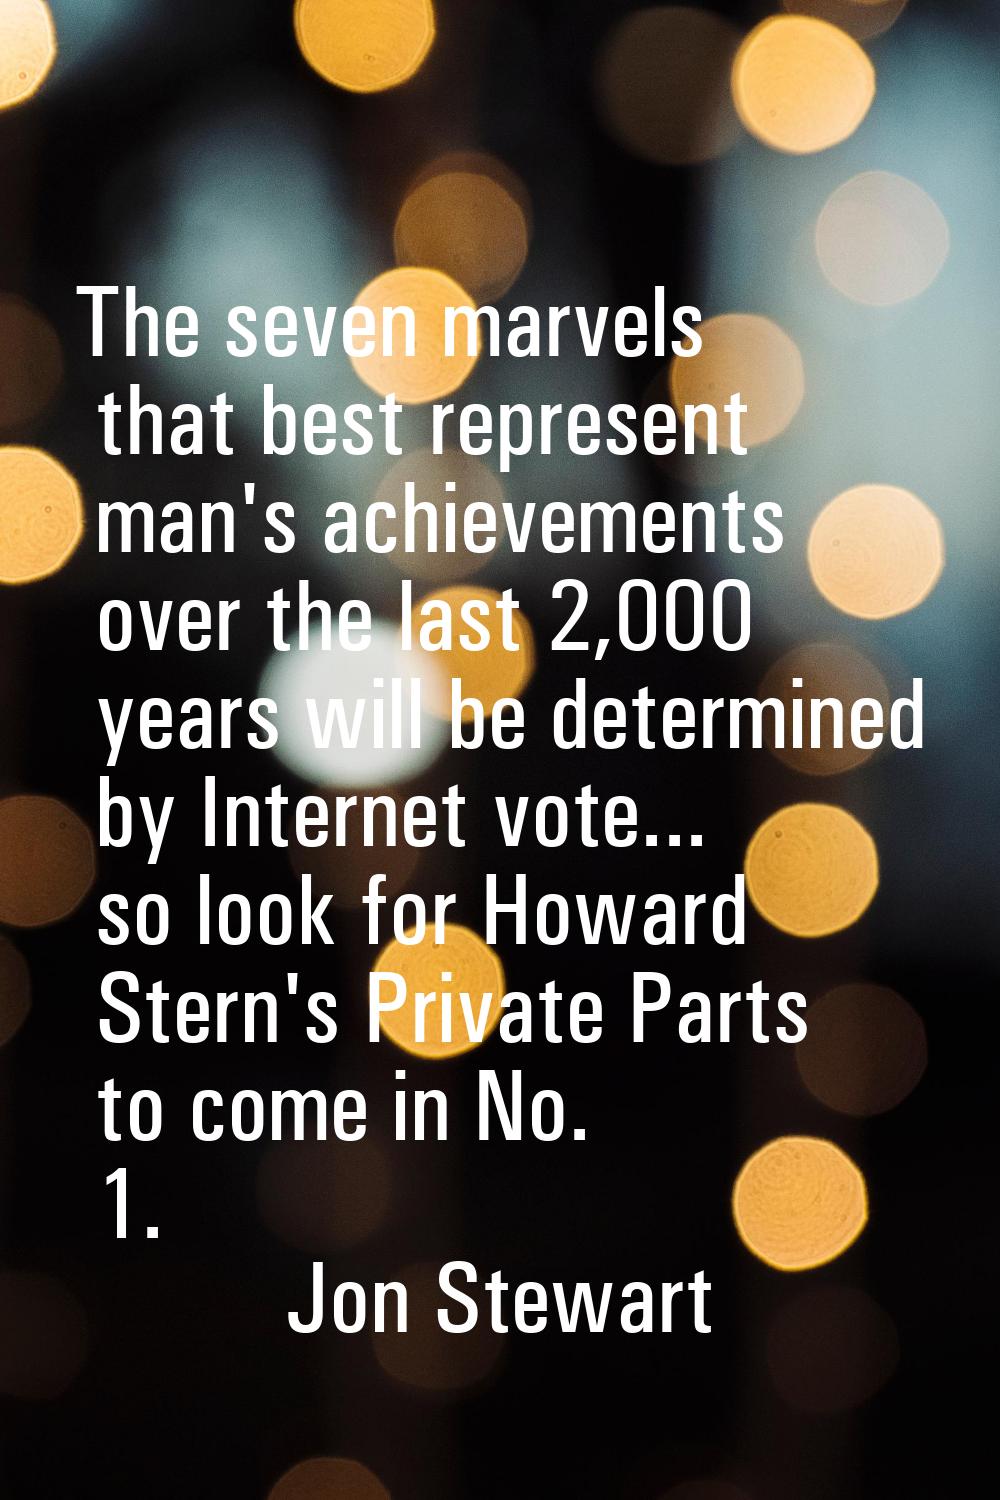 The seven marvels that best represent man's achievements over the last 2,000 years will be determin